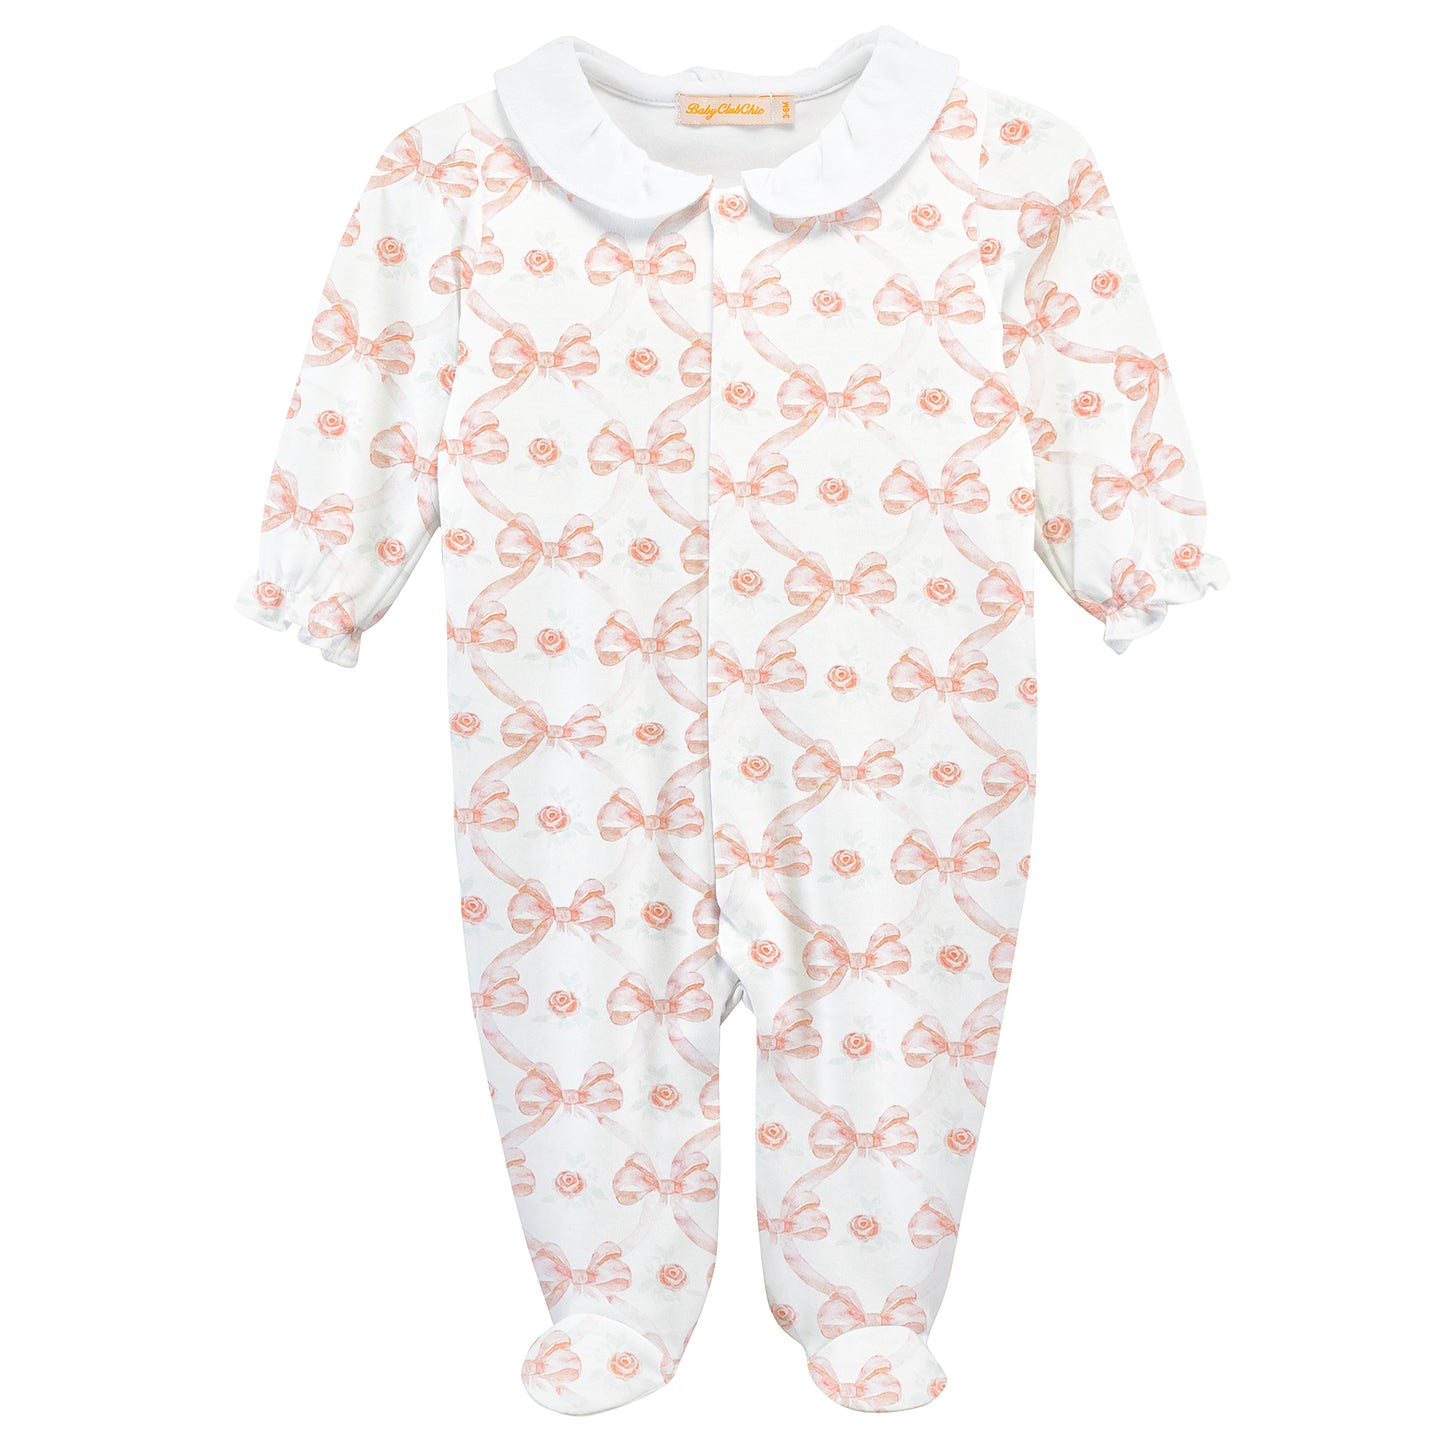 Baby Club Chic - Bows & Roses Footie